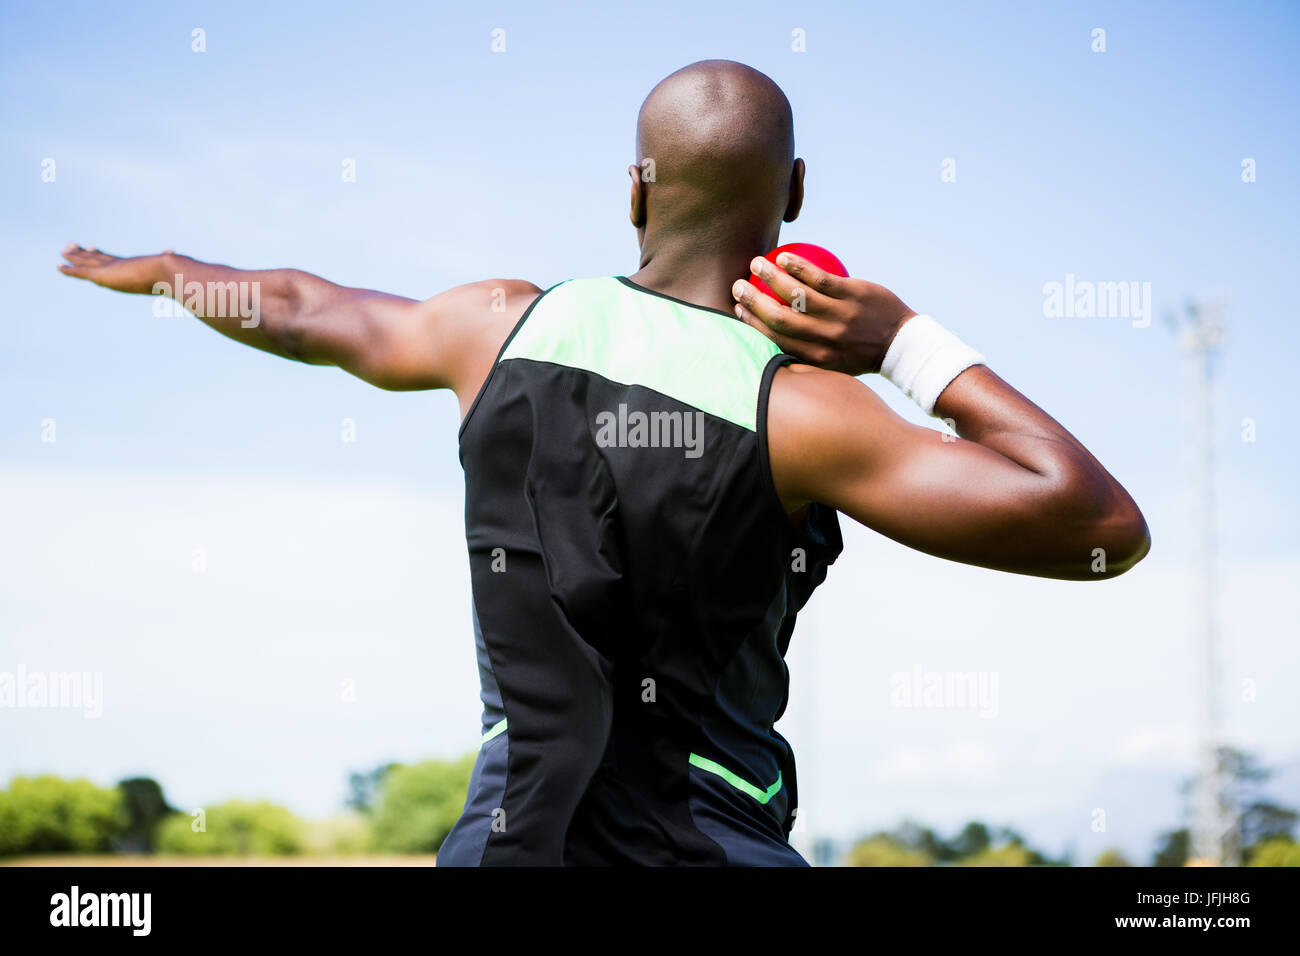 730+ Shot Put Stock Photos, Pictures & Royalty-free Images